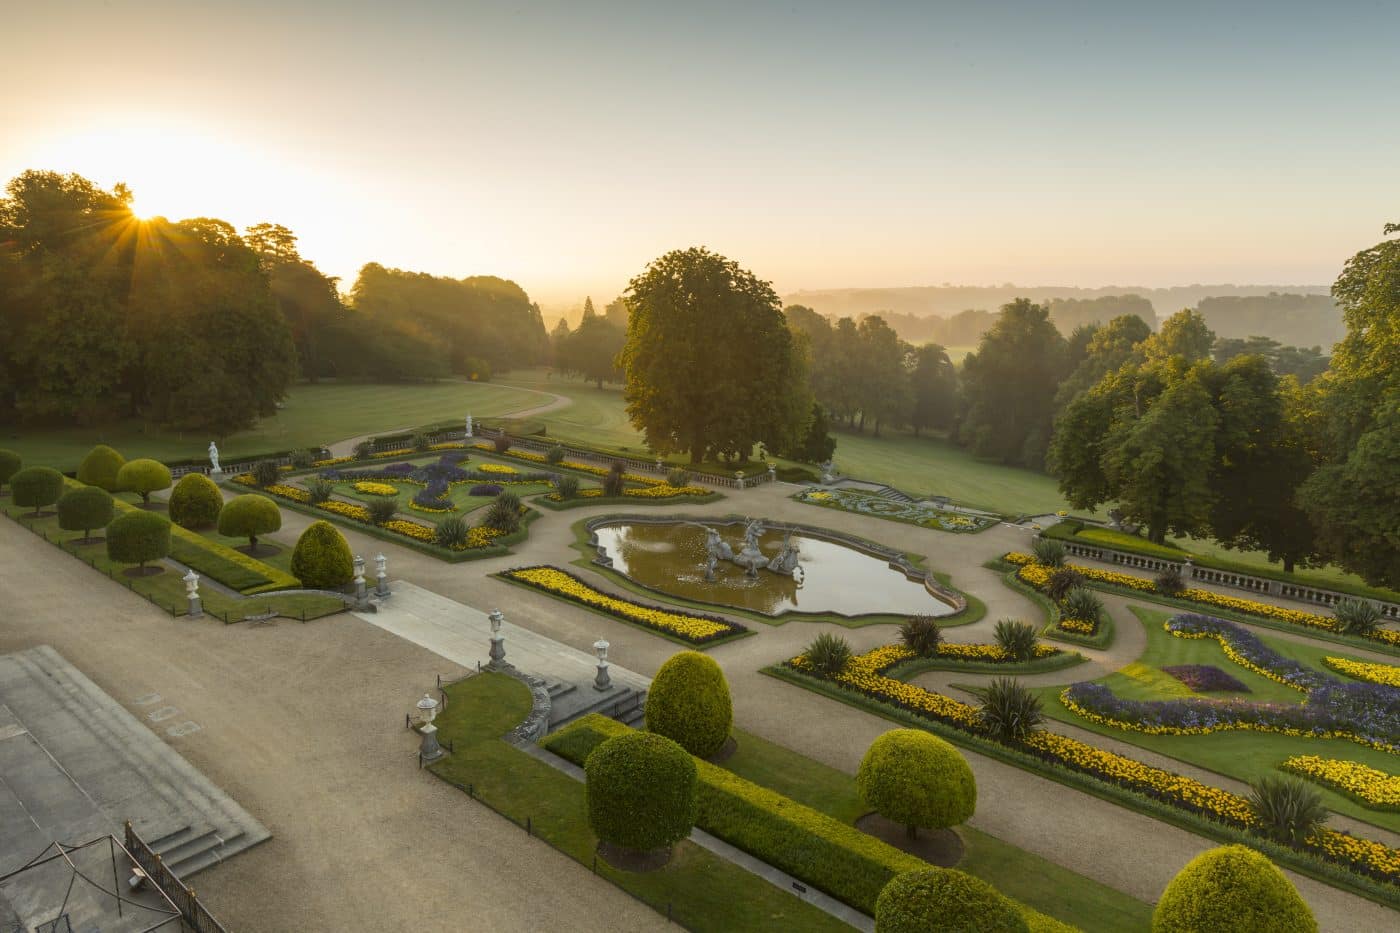 Formal Victorian-style parterre gardens at Waddesdon Manor in England with three-dimensional planting